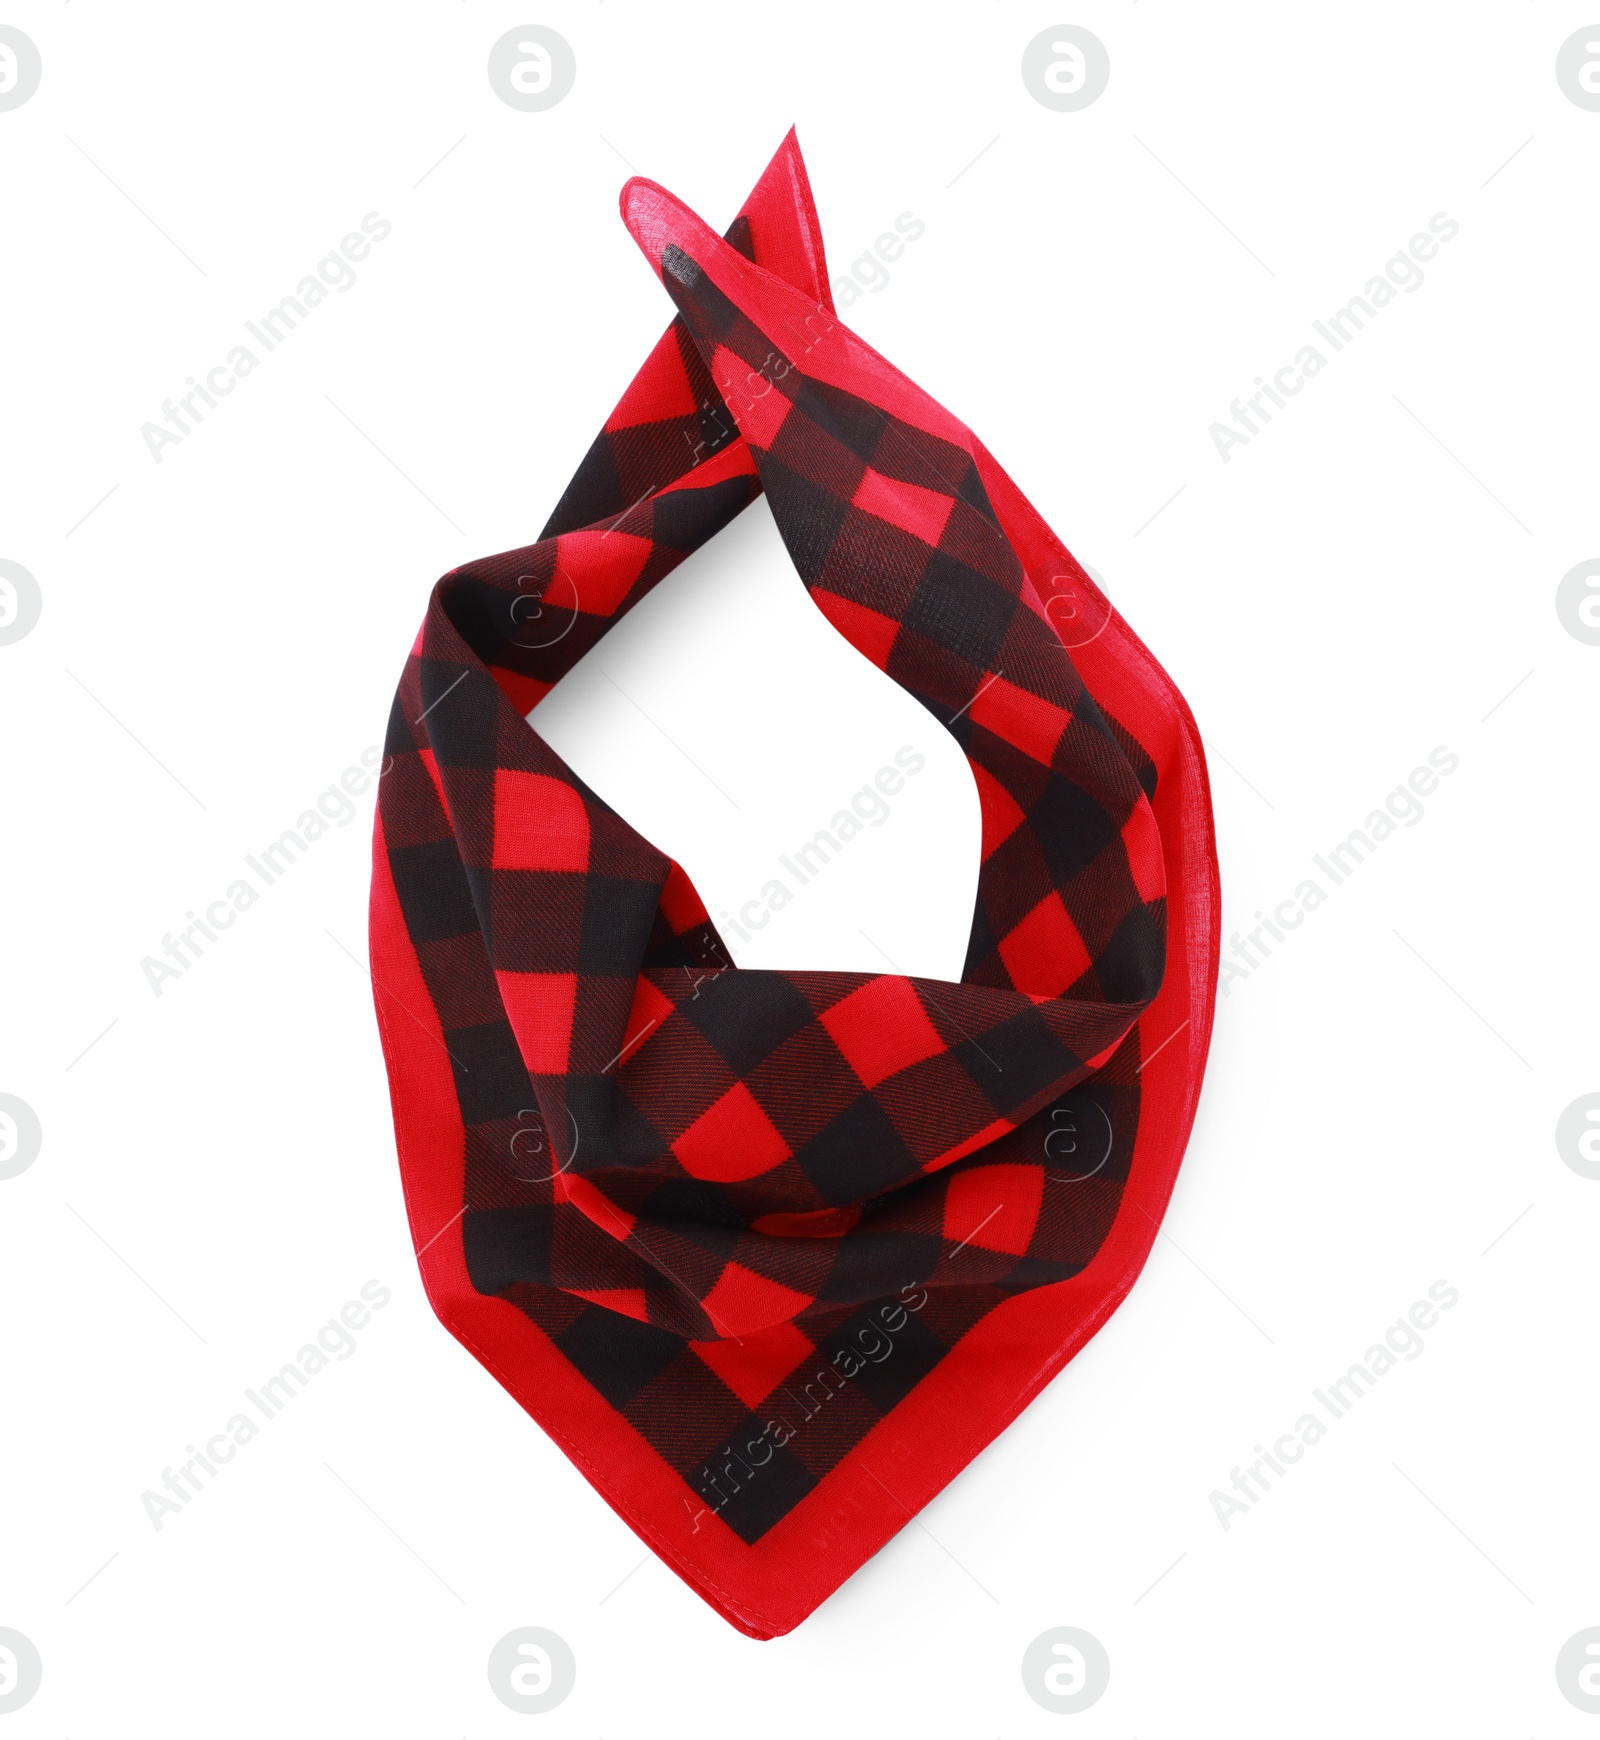 Photo of Folded red bandana with check pattern isolated on white, top view